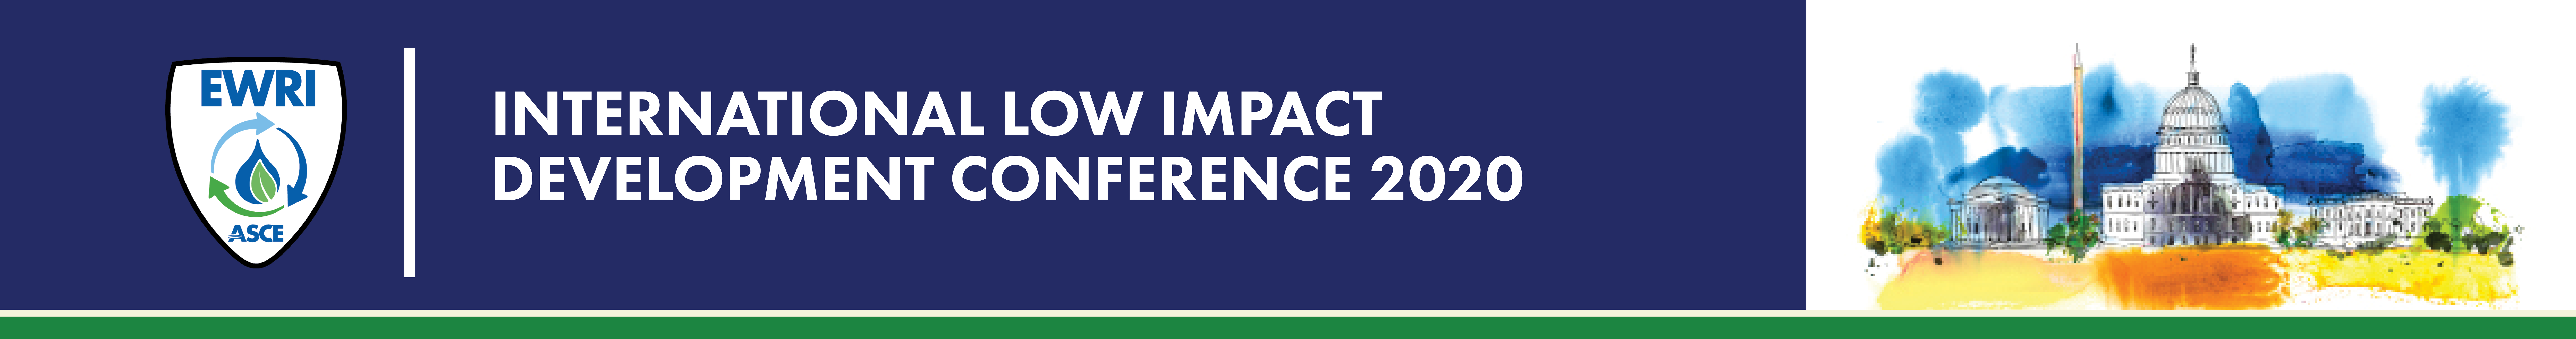 The banner to welcome you to Low Impact Development (LID) Conference 2020